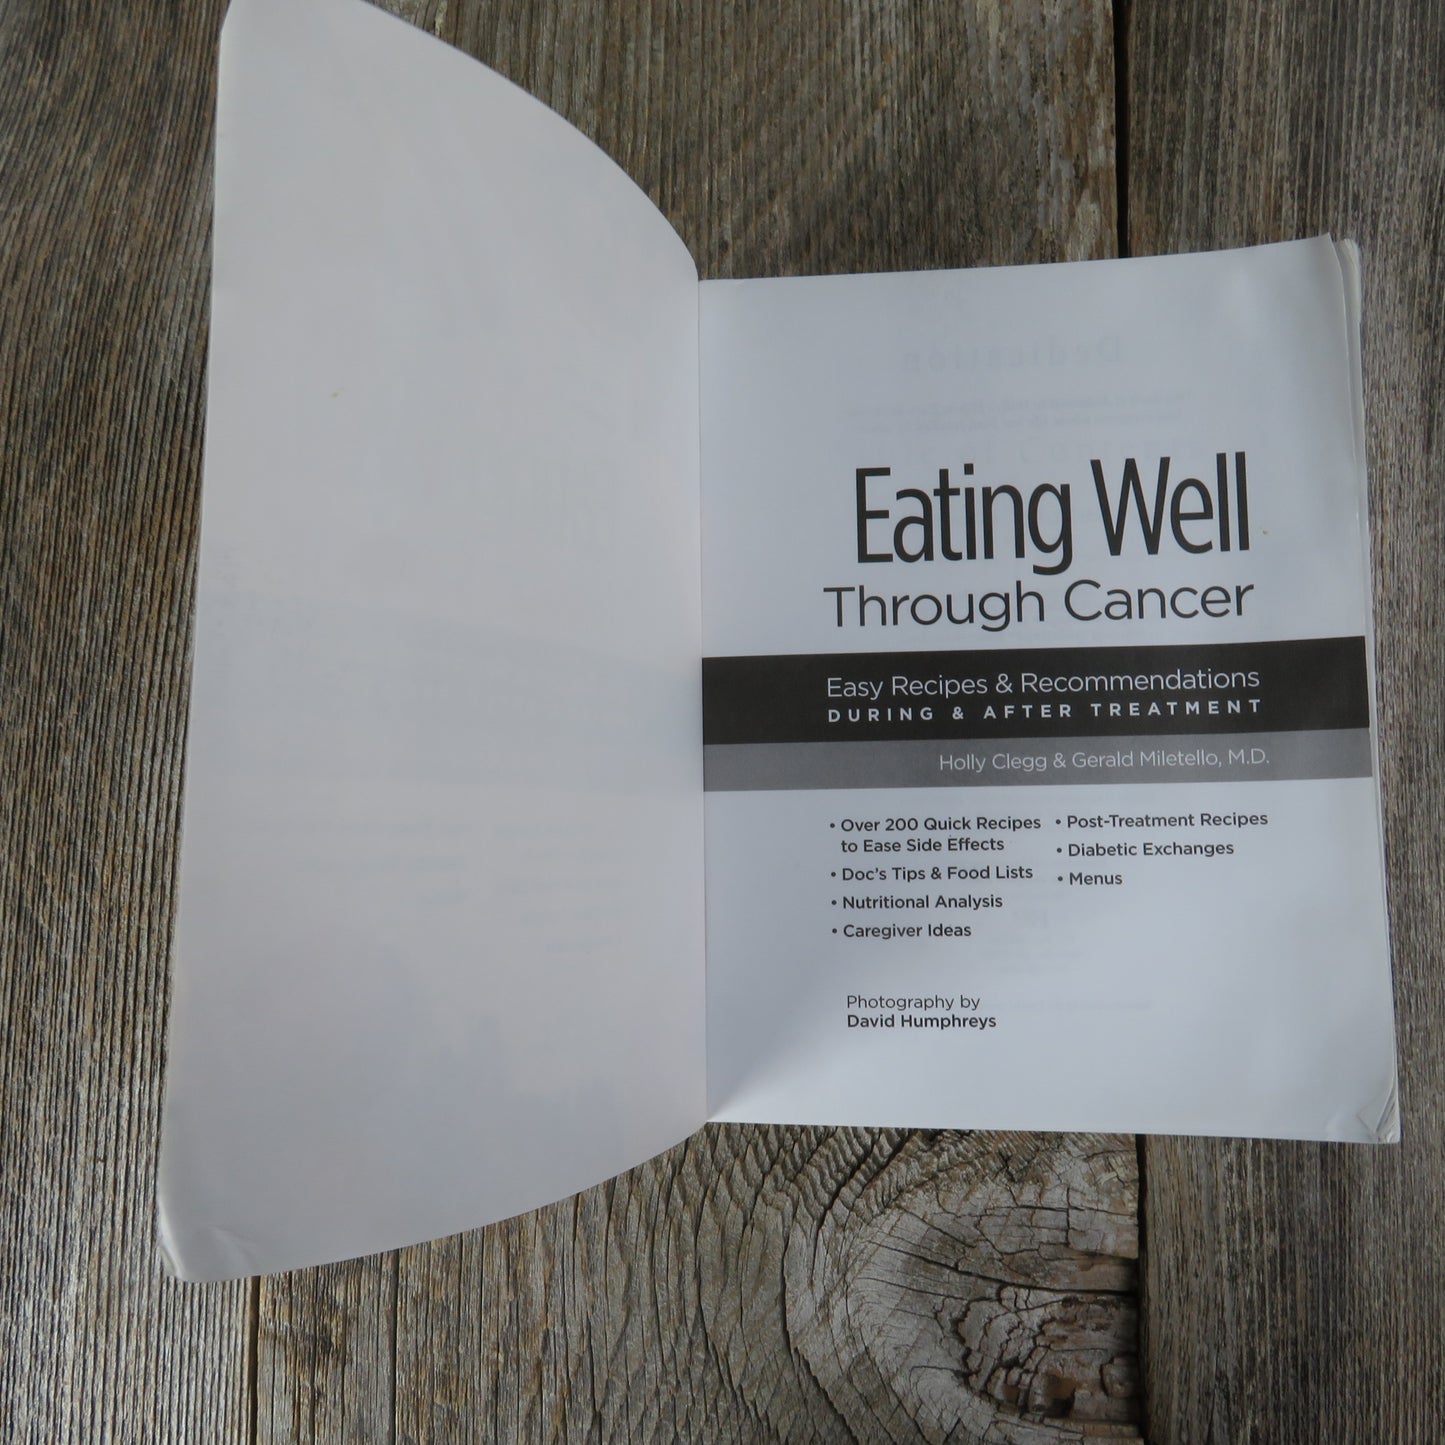 Eating Well Through Cancer Cookbook  Holly Clegg Gerald Miletello 2006 - At Grandma's Table